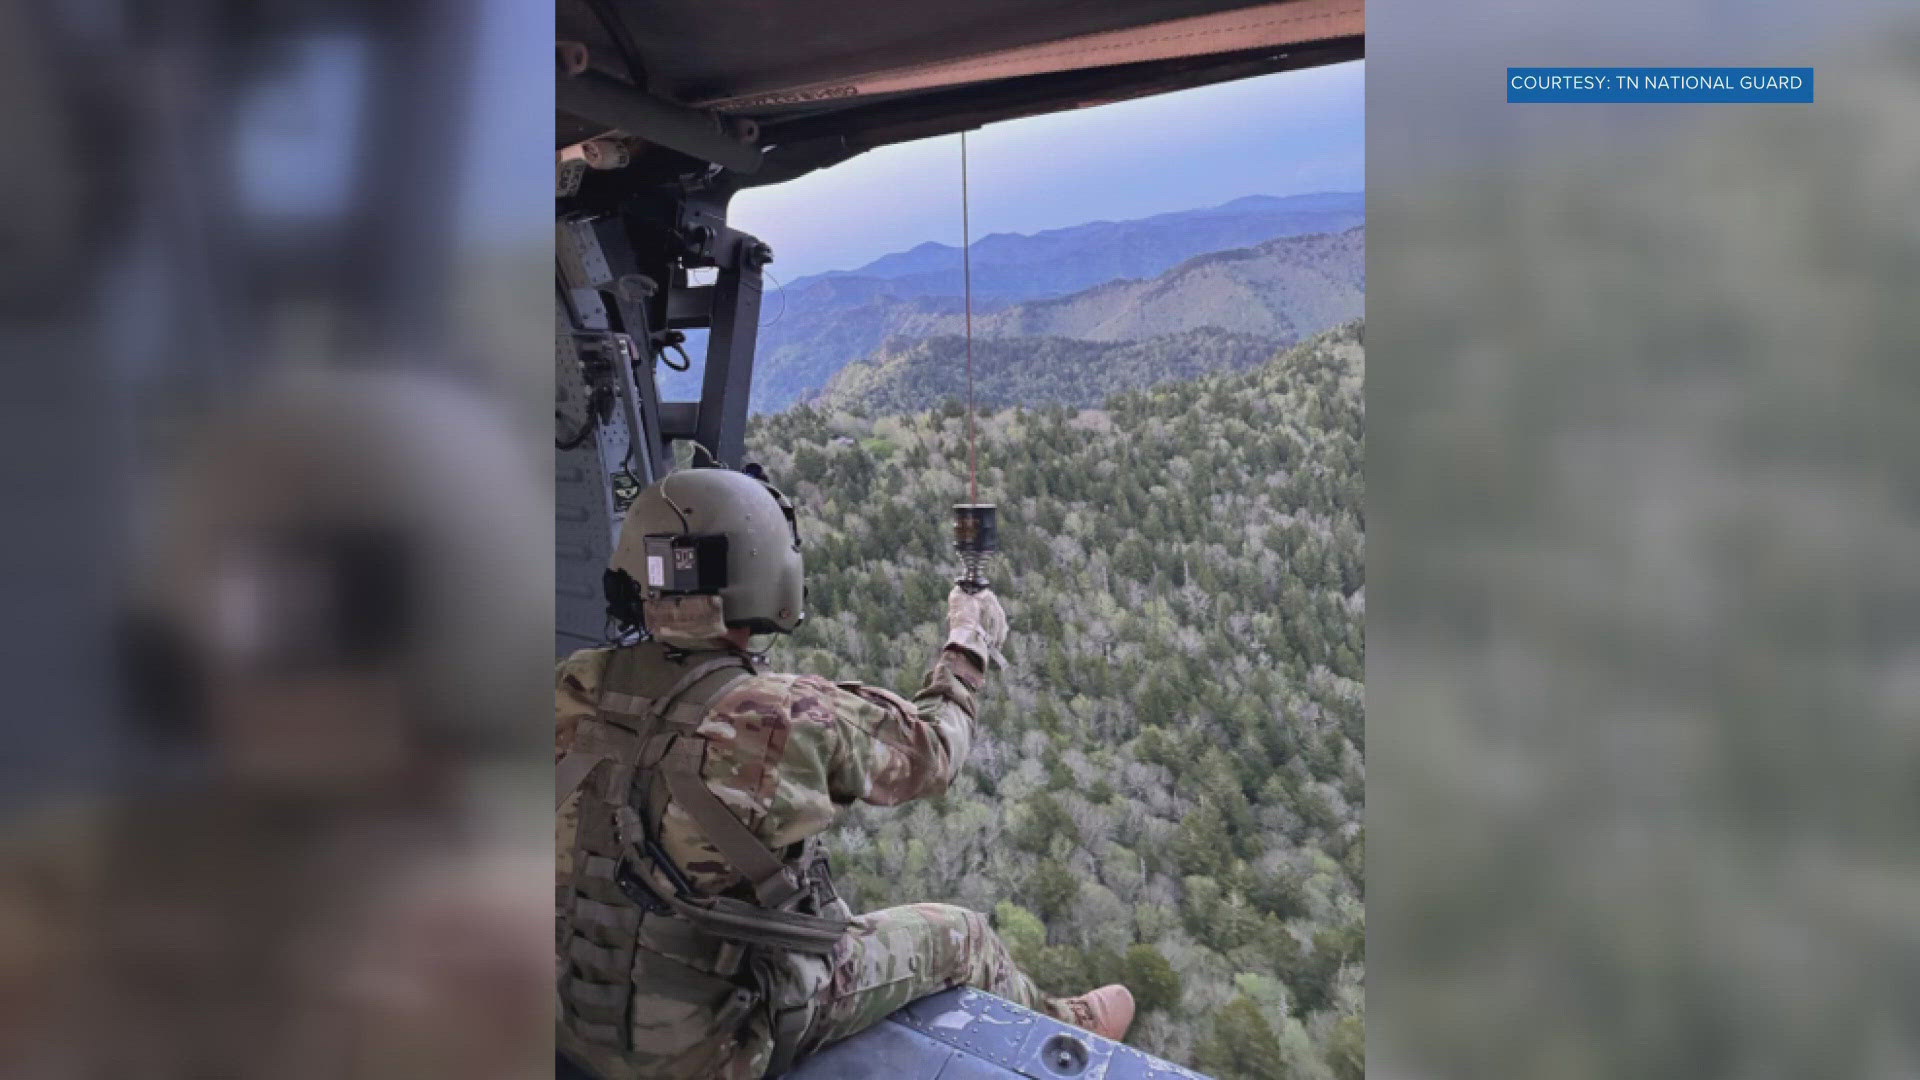 Crews located the hiker more than 5,000 feet above sea level at Icewater Spring Monday evening, according to the Tennessee National Guard.